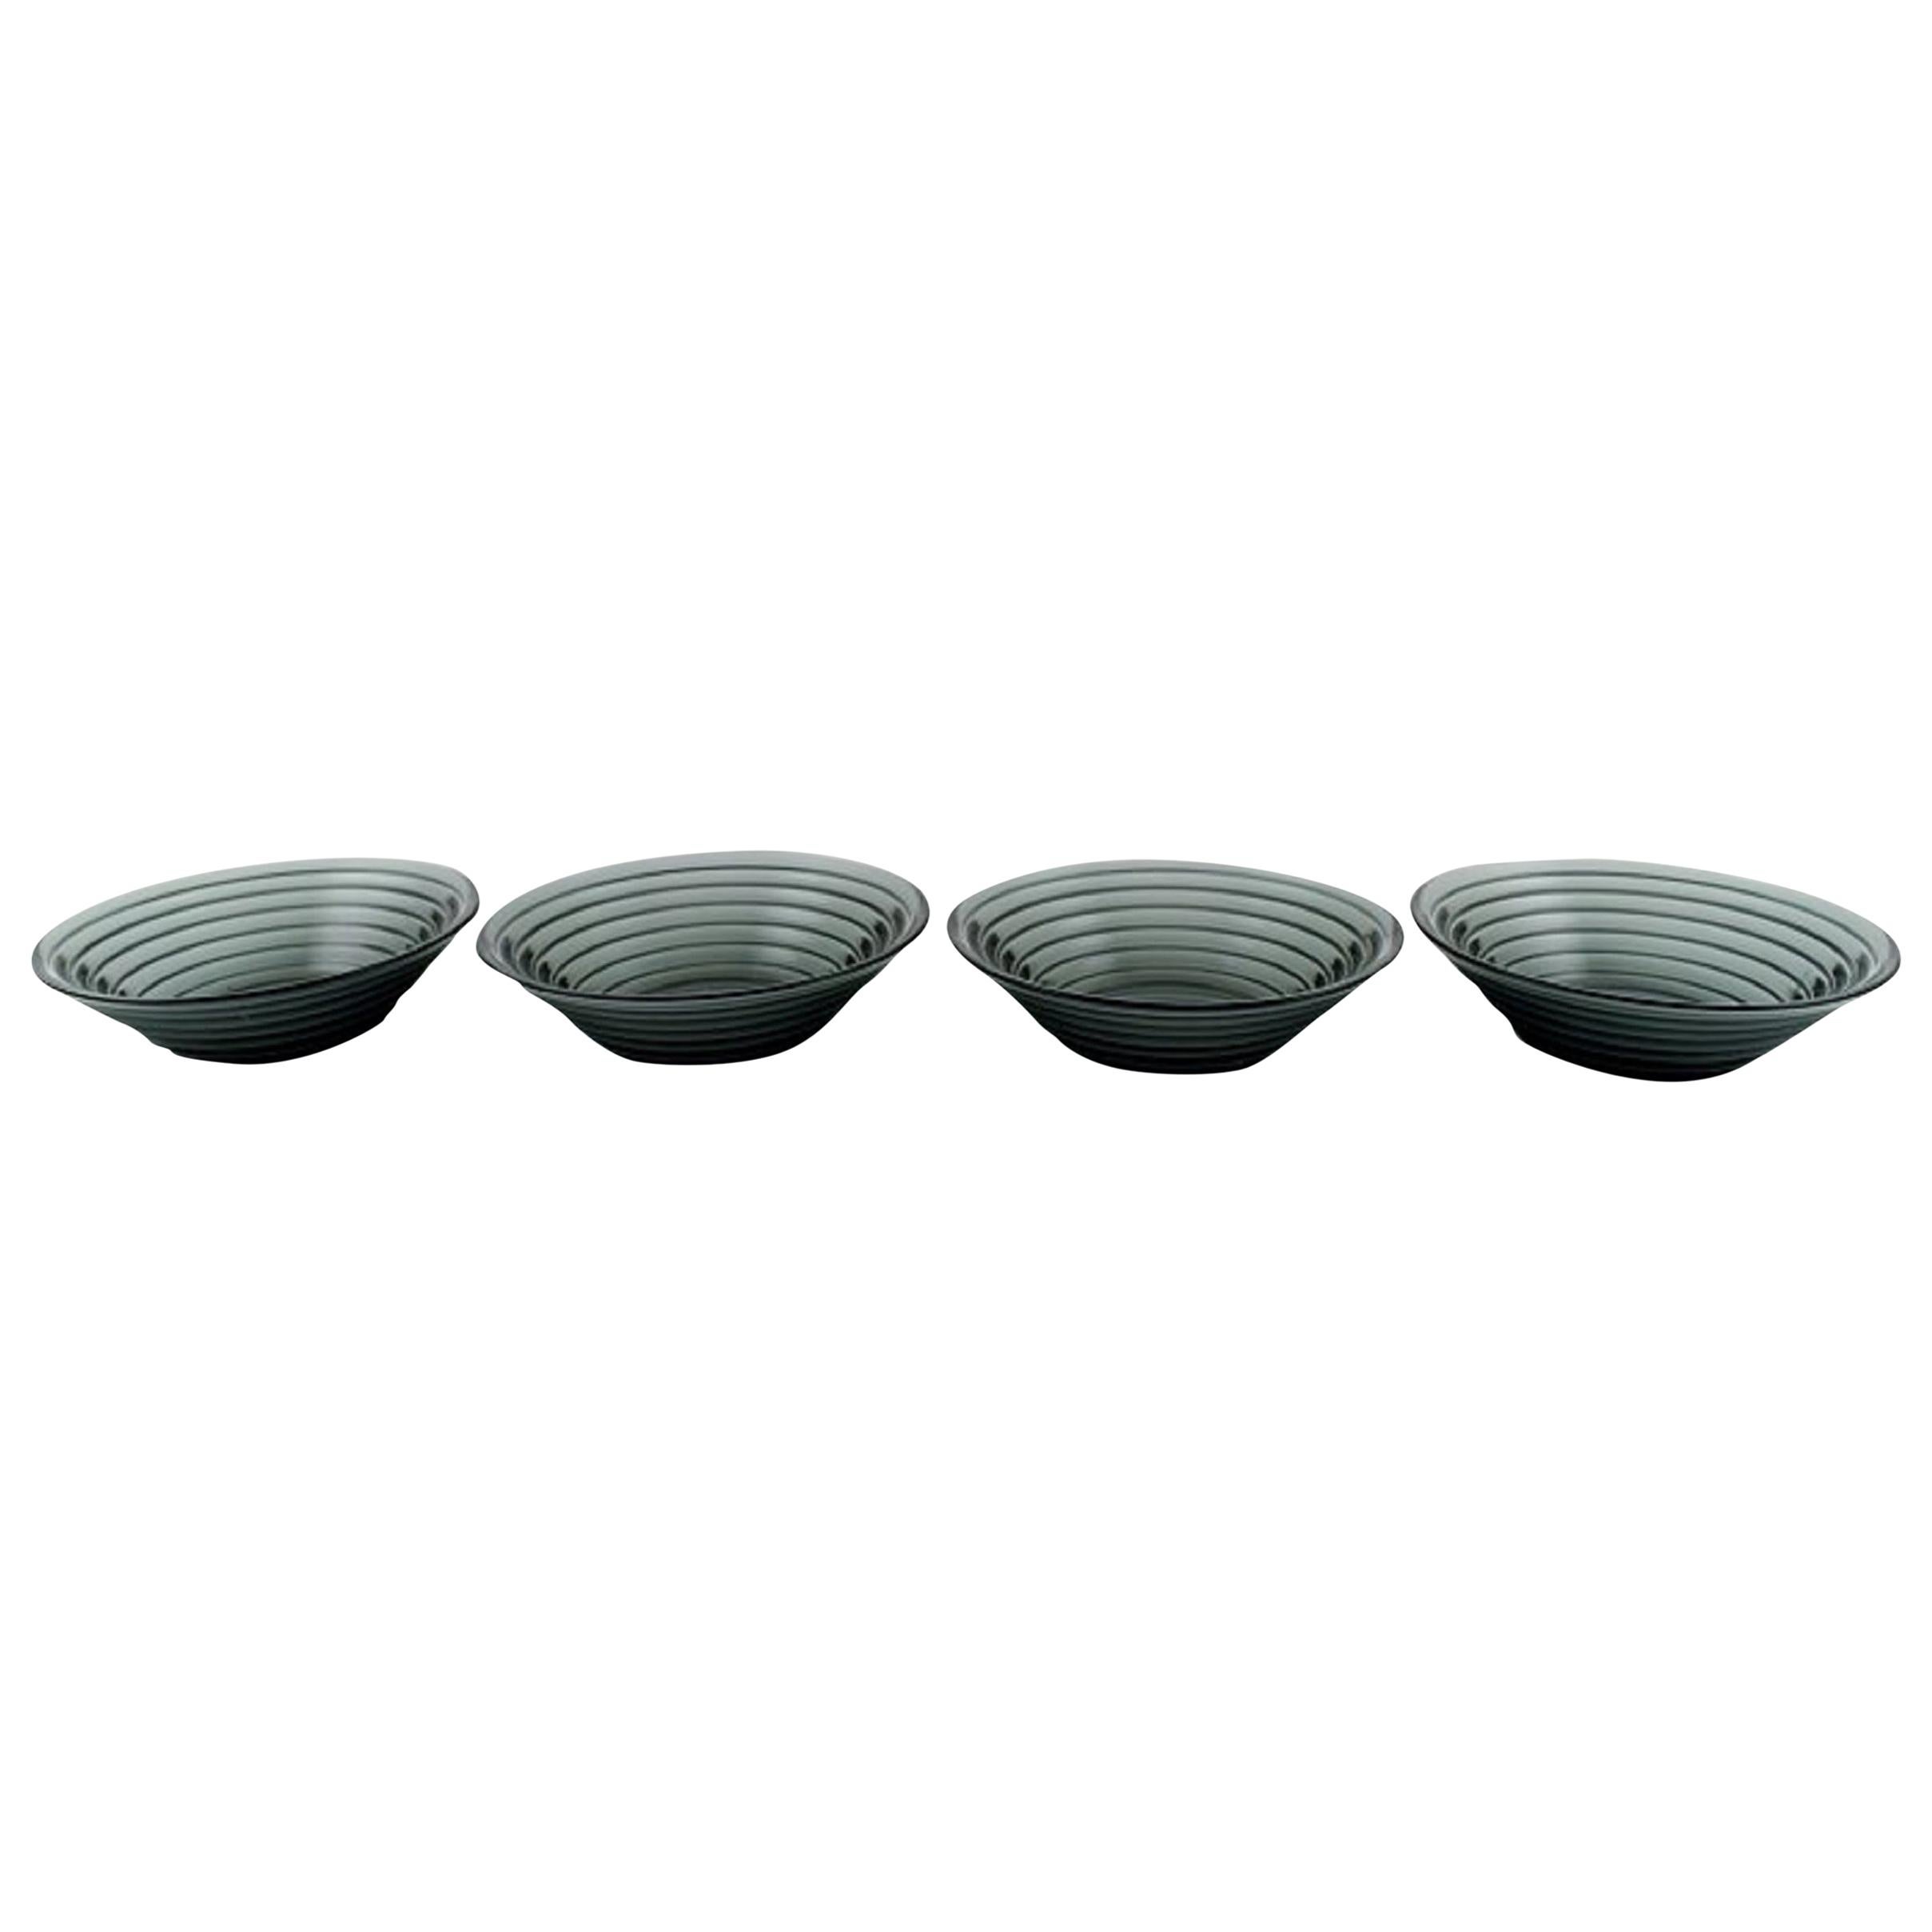 Aino Aalto for Iittala, Four Bowls in Blue-Green Art Glass, Finnish Design For Sale